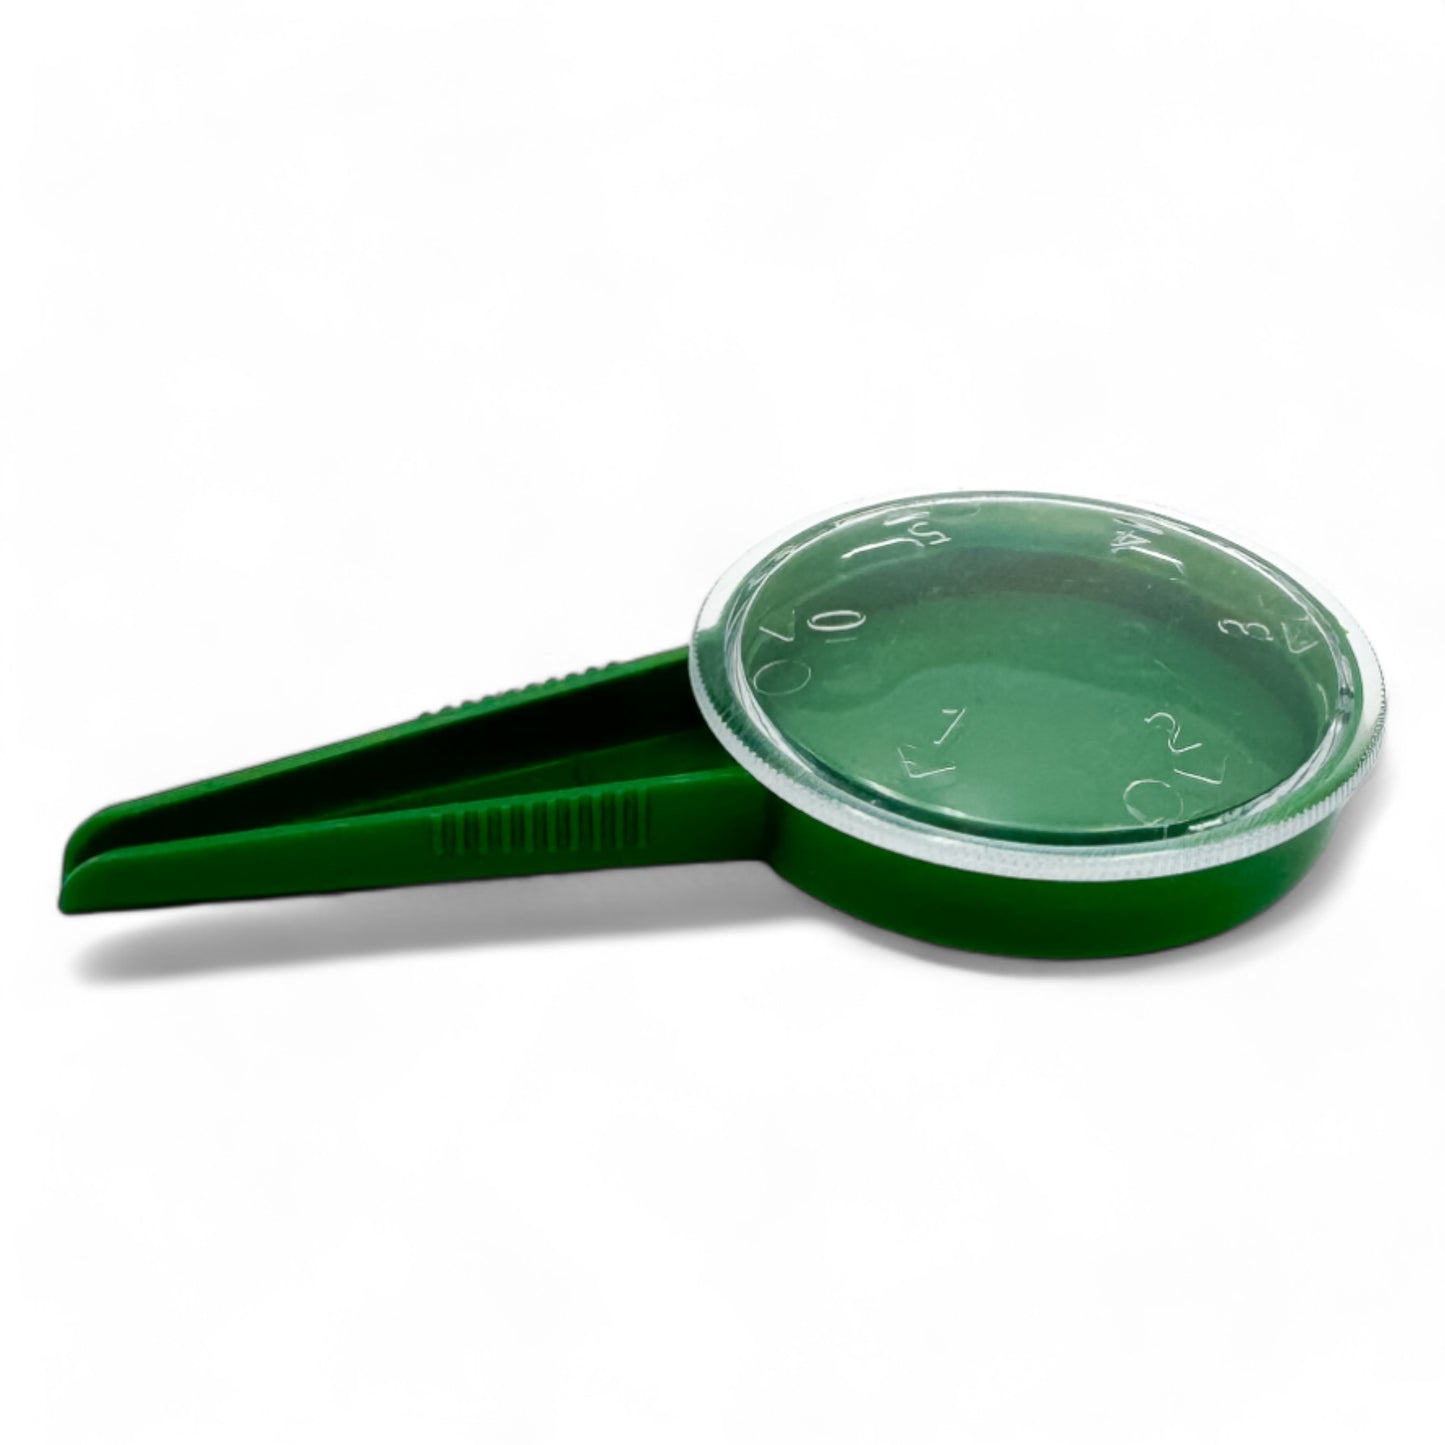 Handheld seed dispenser with green lid and integrated spoon